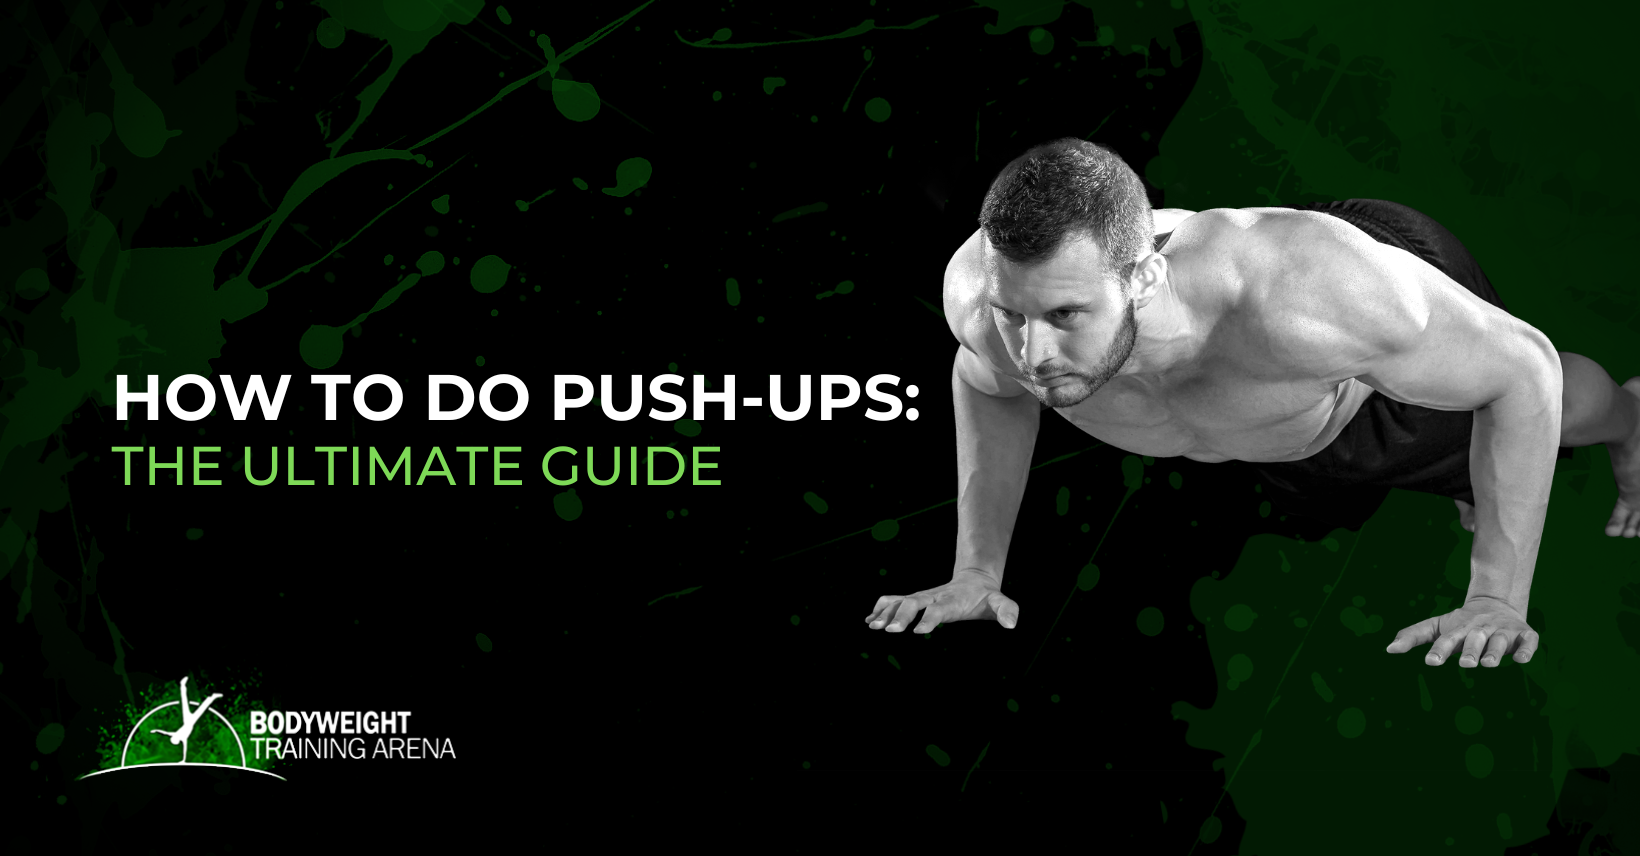 How to do Push-ups: The Ultimate Guide